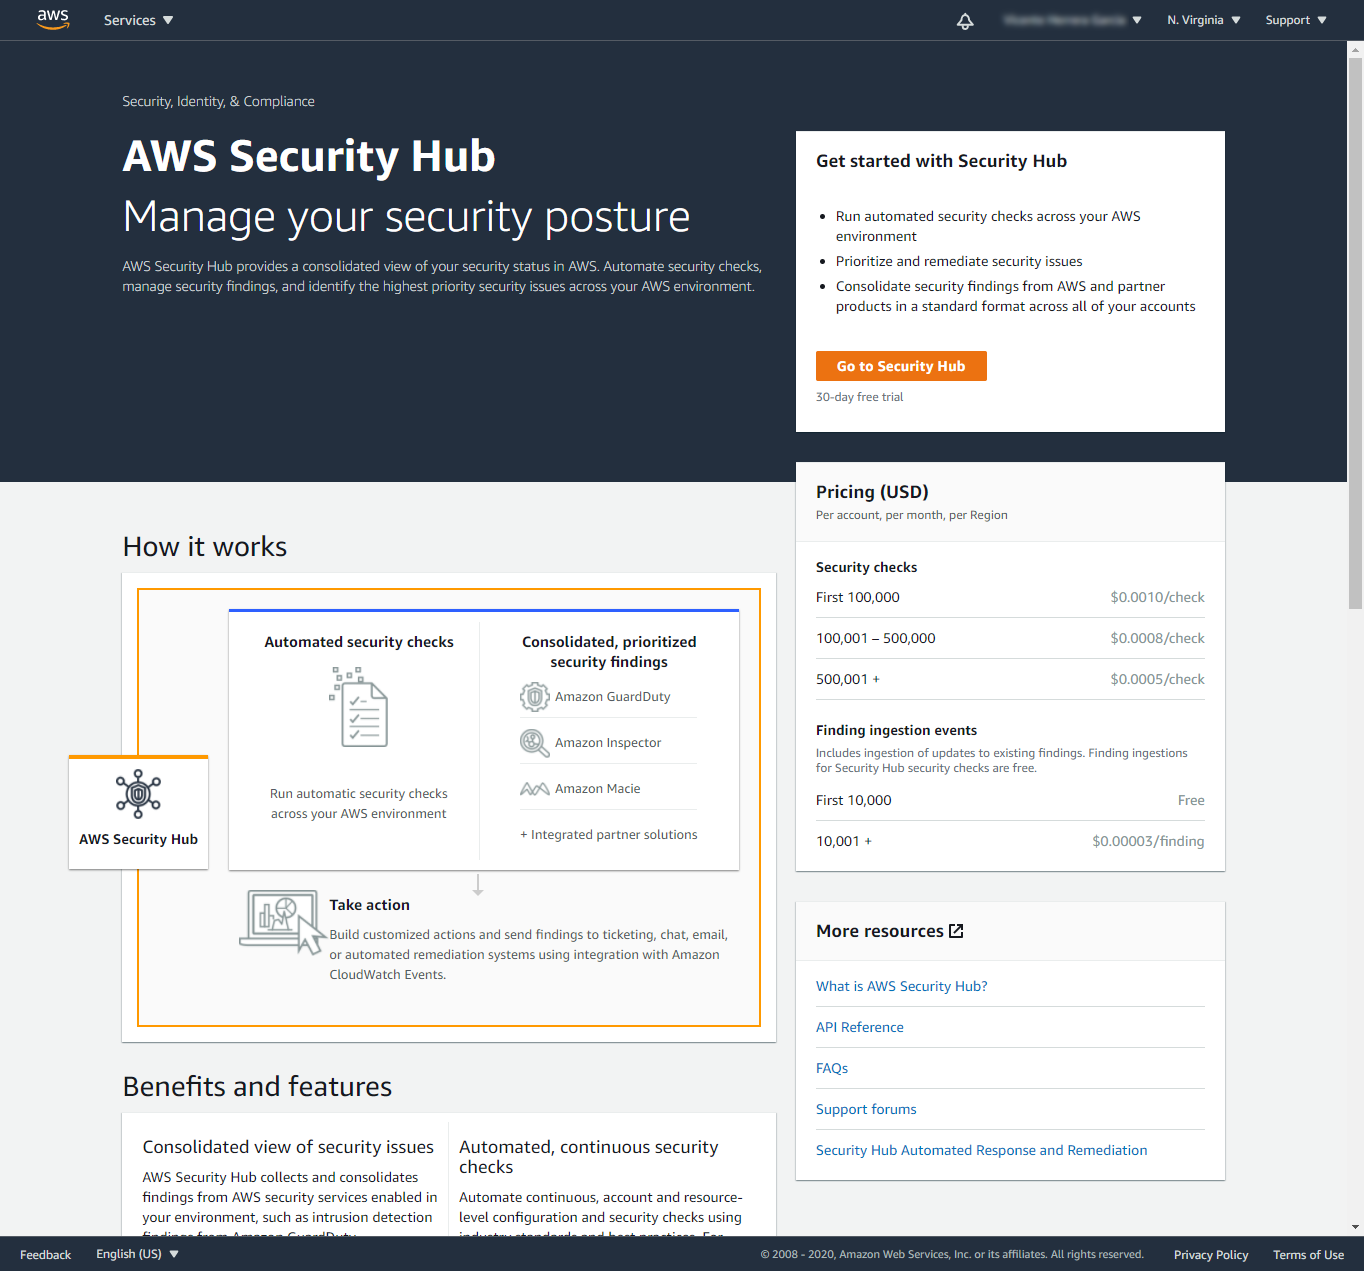 The AWS security hub landing page